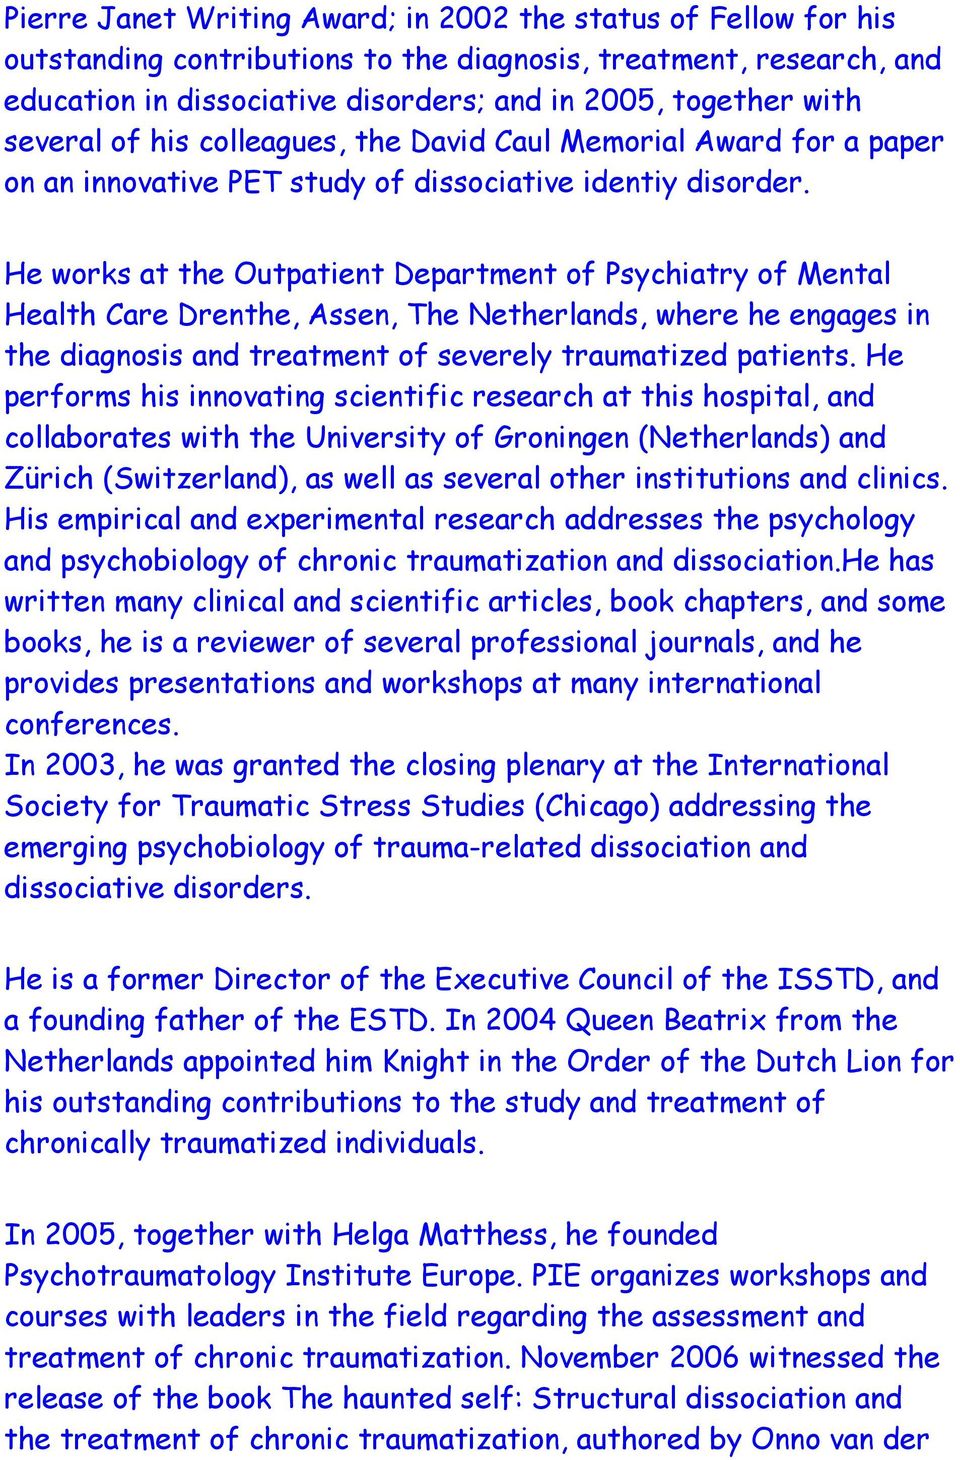 He works at the Outpatient Department of Psychiatry of Mental Health Care Drenthe, Assen, The Netherlands, where he engages in the diagnosis and treatment of severely traumatized patients.